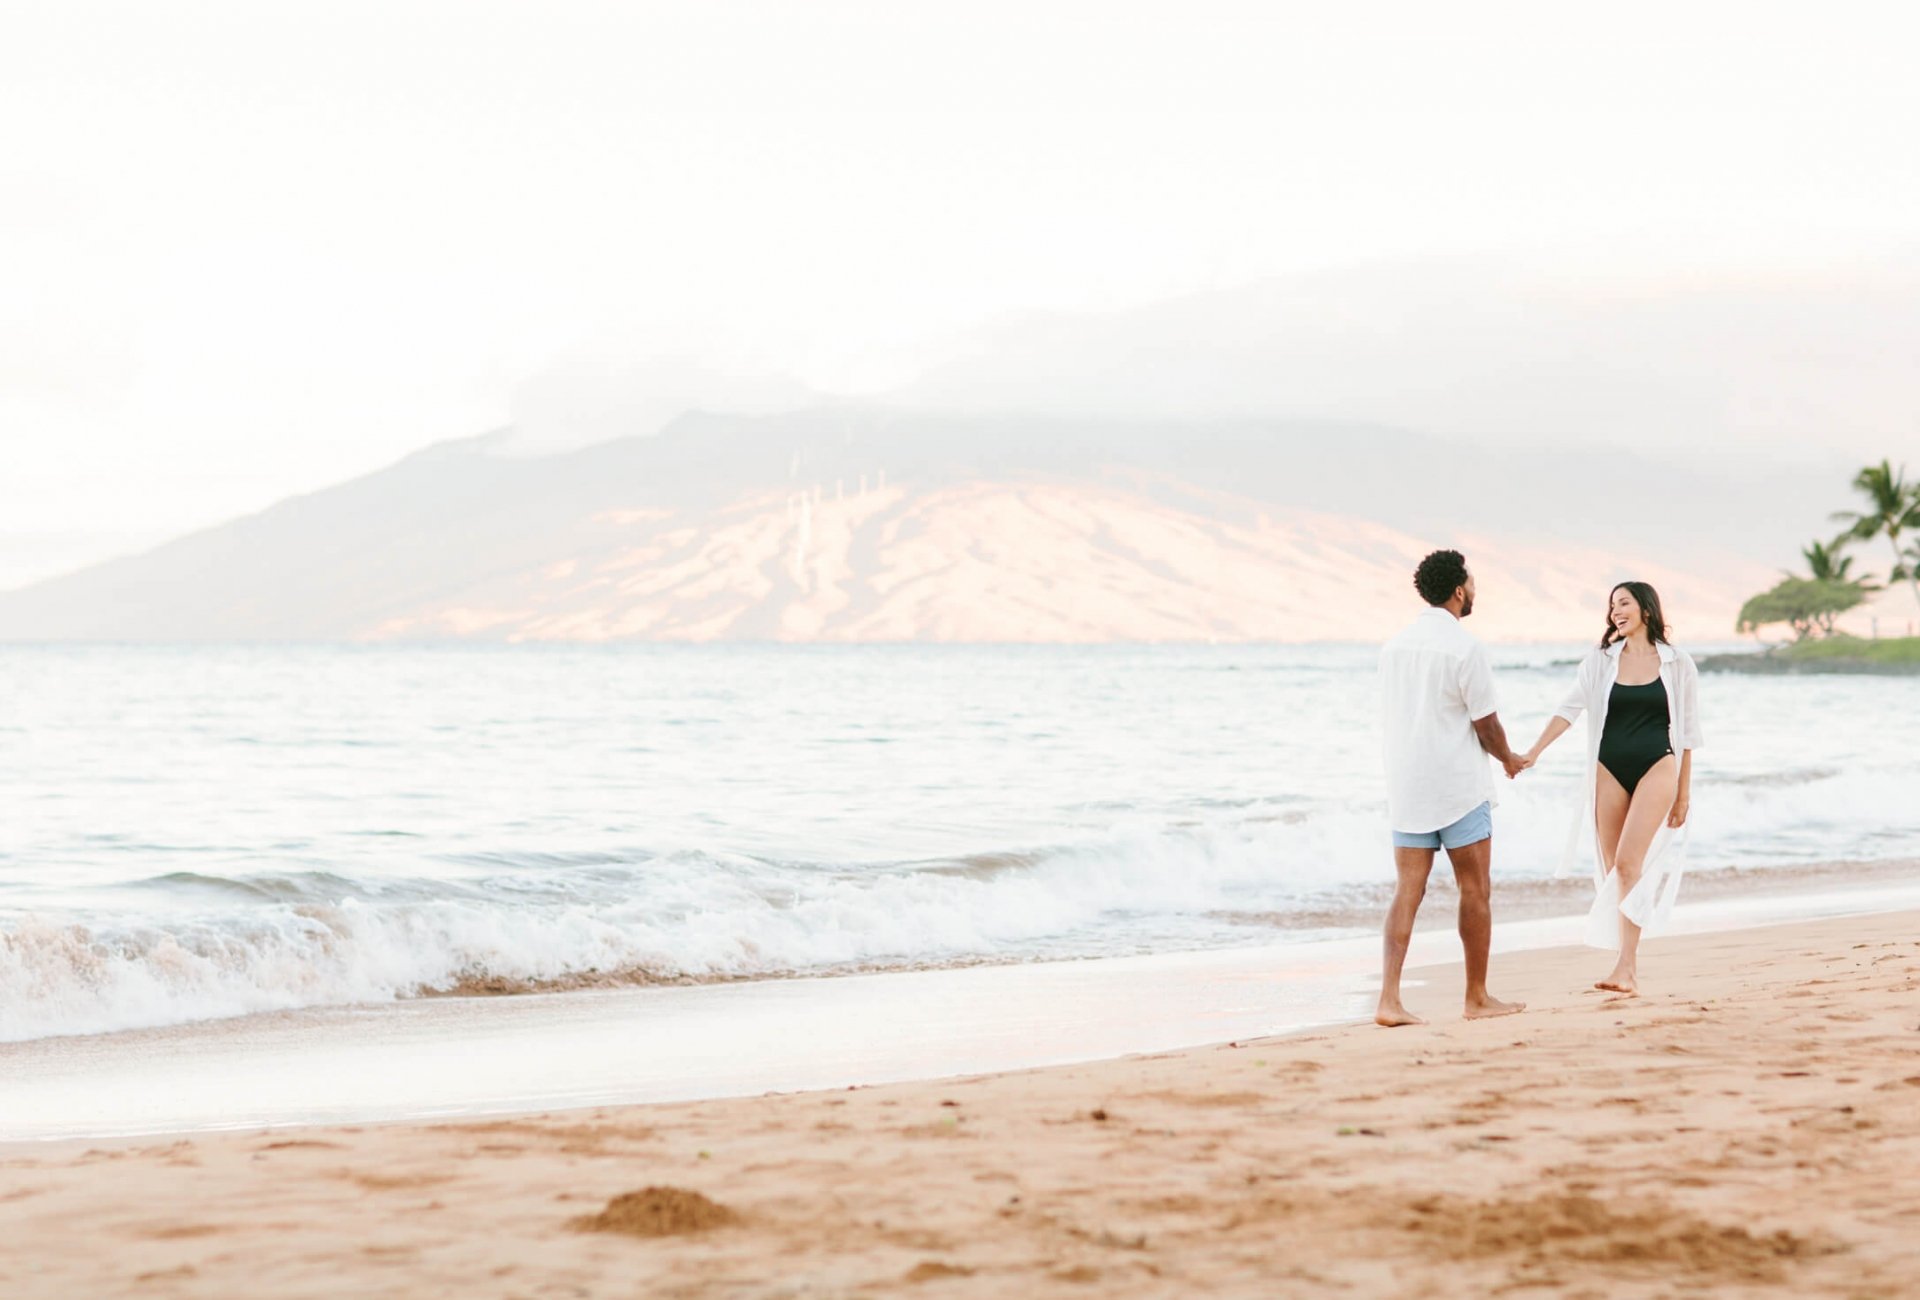 a couple walks along the beach beside the ocean with mountains in the background